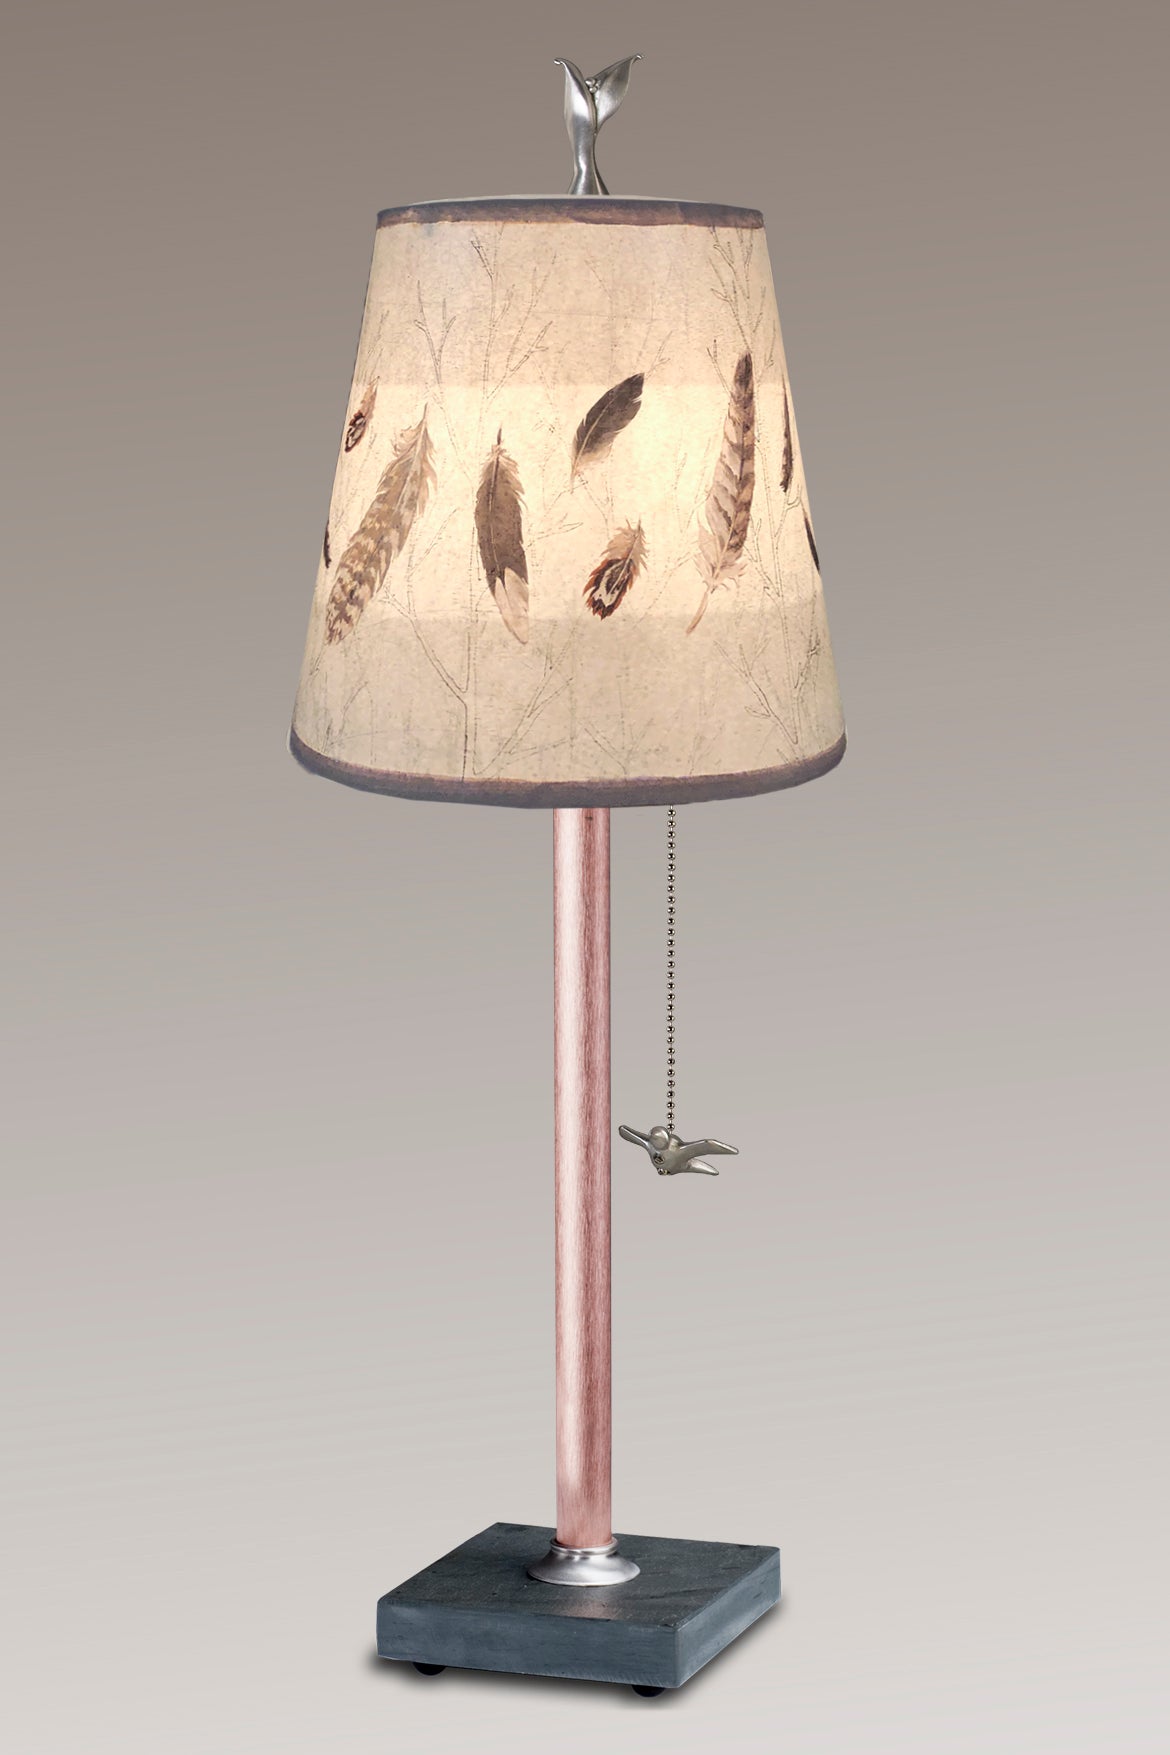 Janna Ugone & Co Table Lamps Copper Table Lamp with Small Drum in Feathers in Pebble